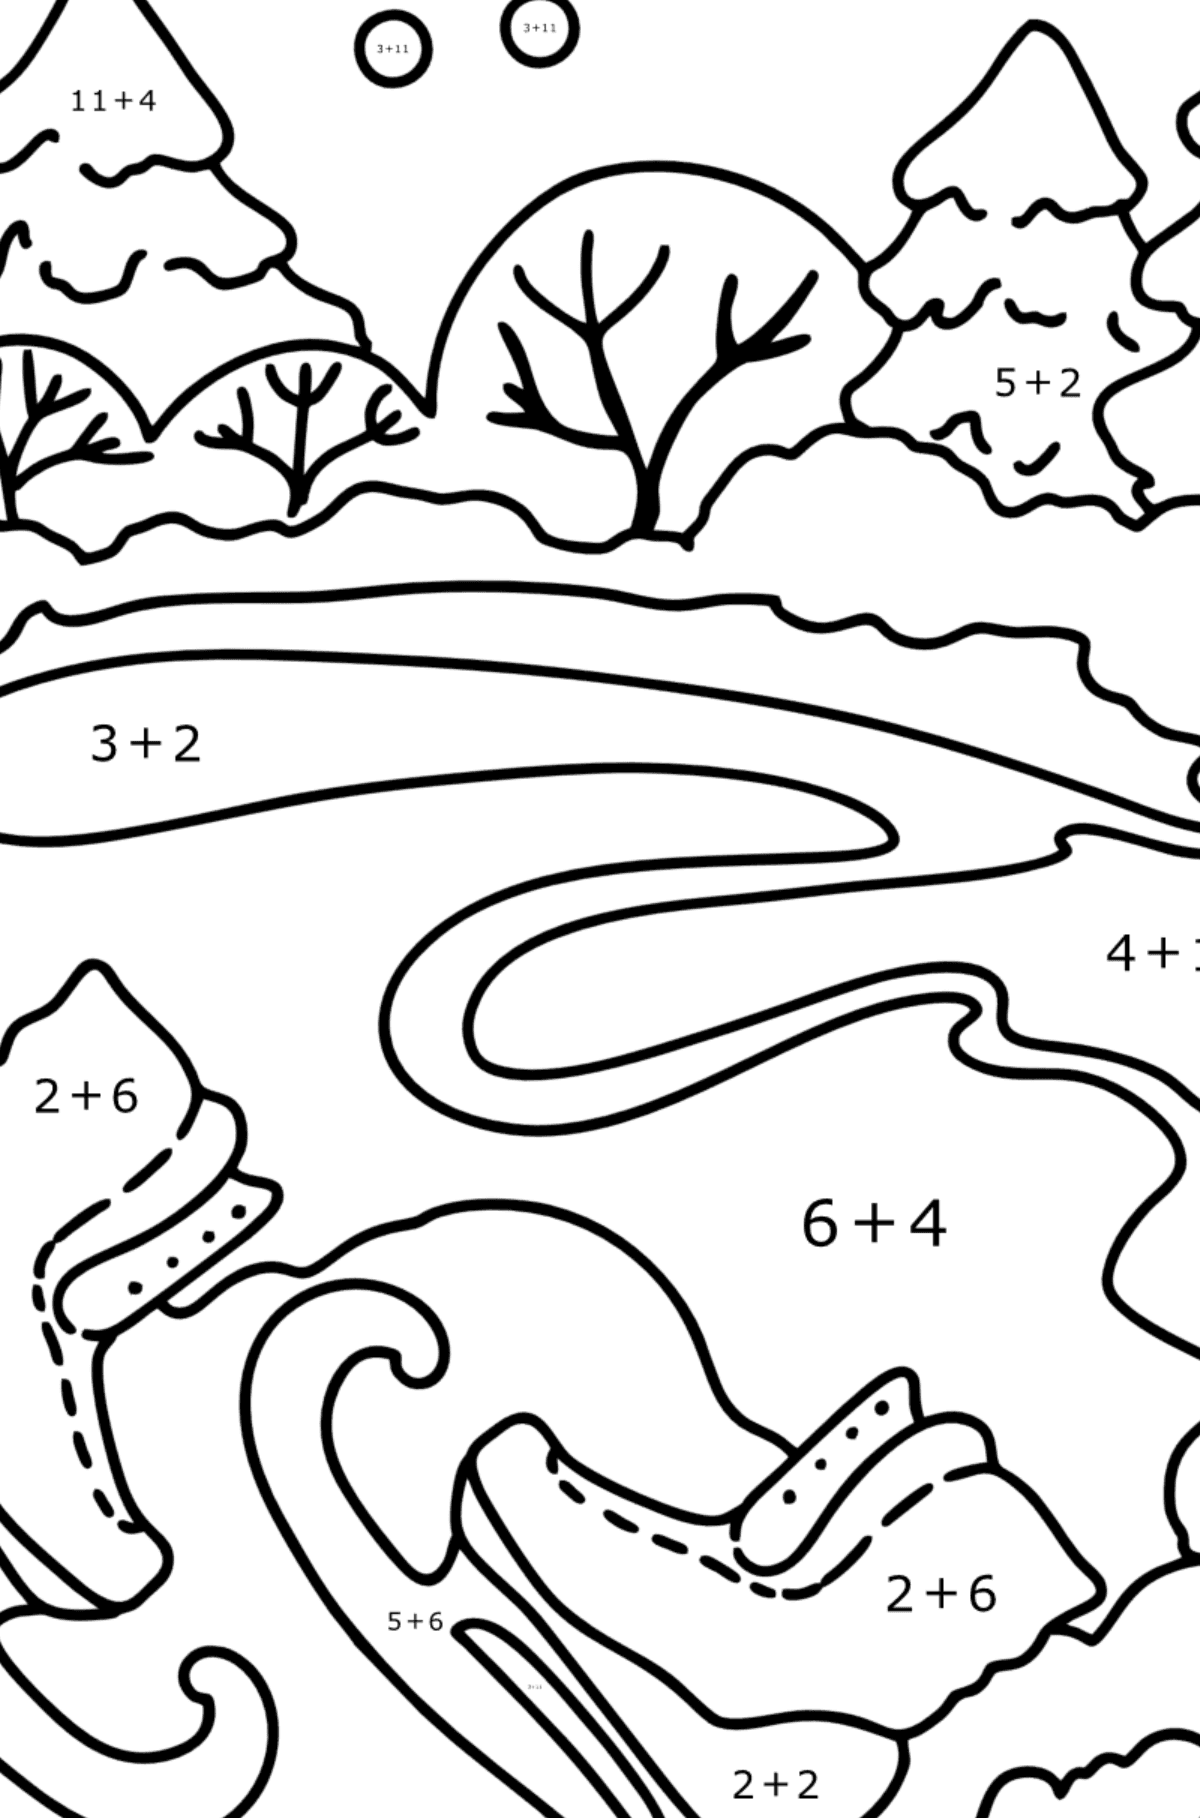 Coloring page - Winter and skates - Math Coloring - Addition for Kids